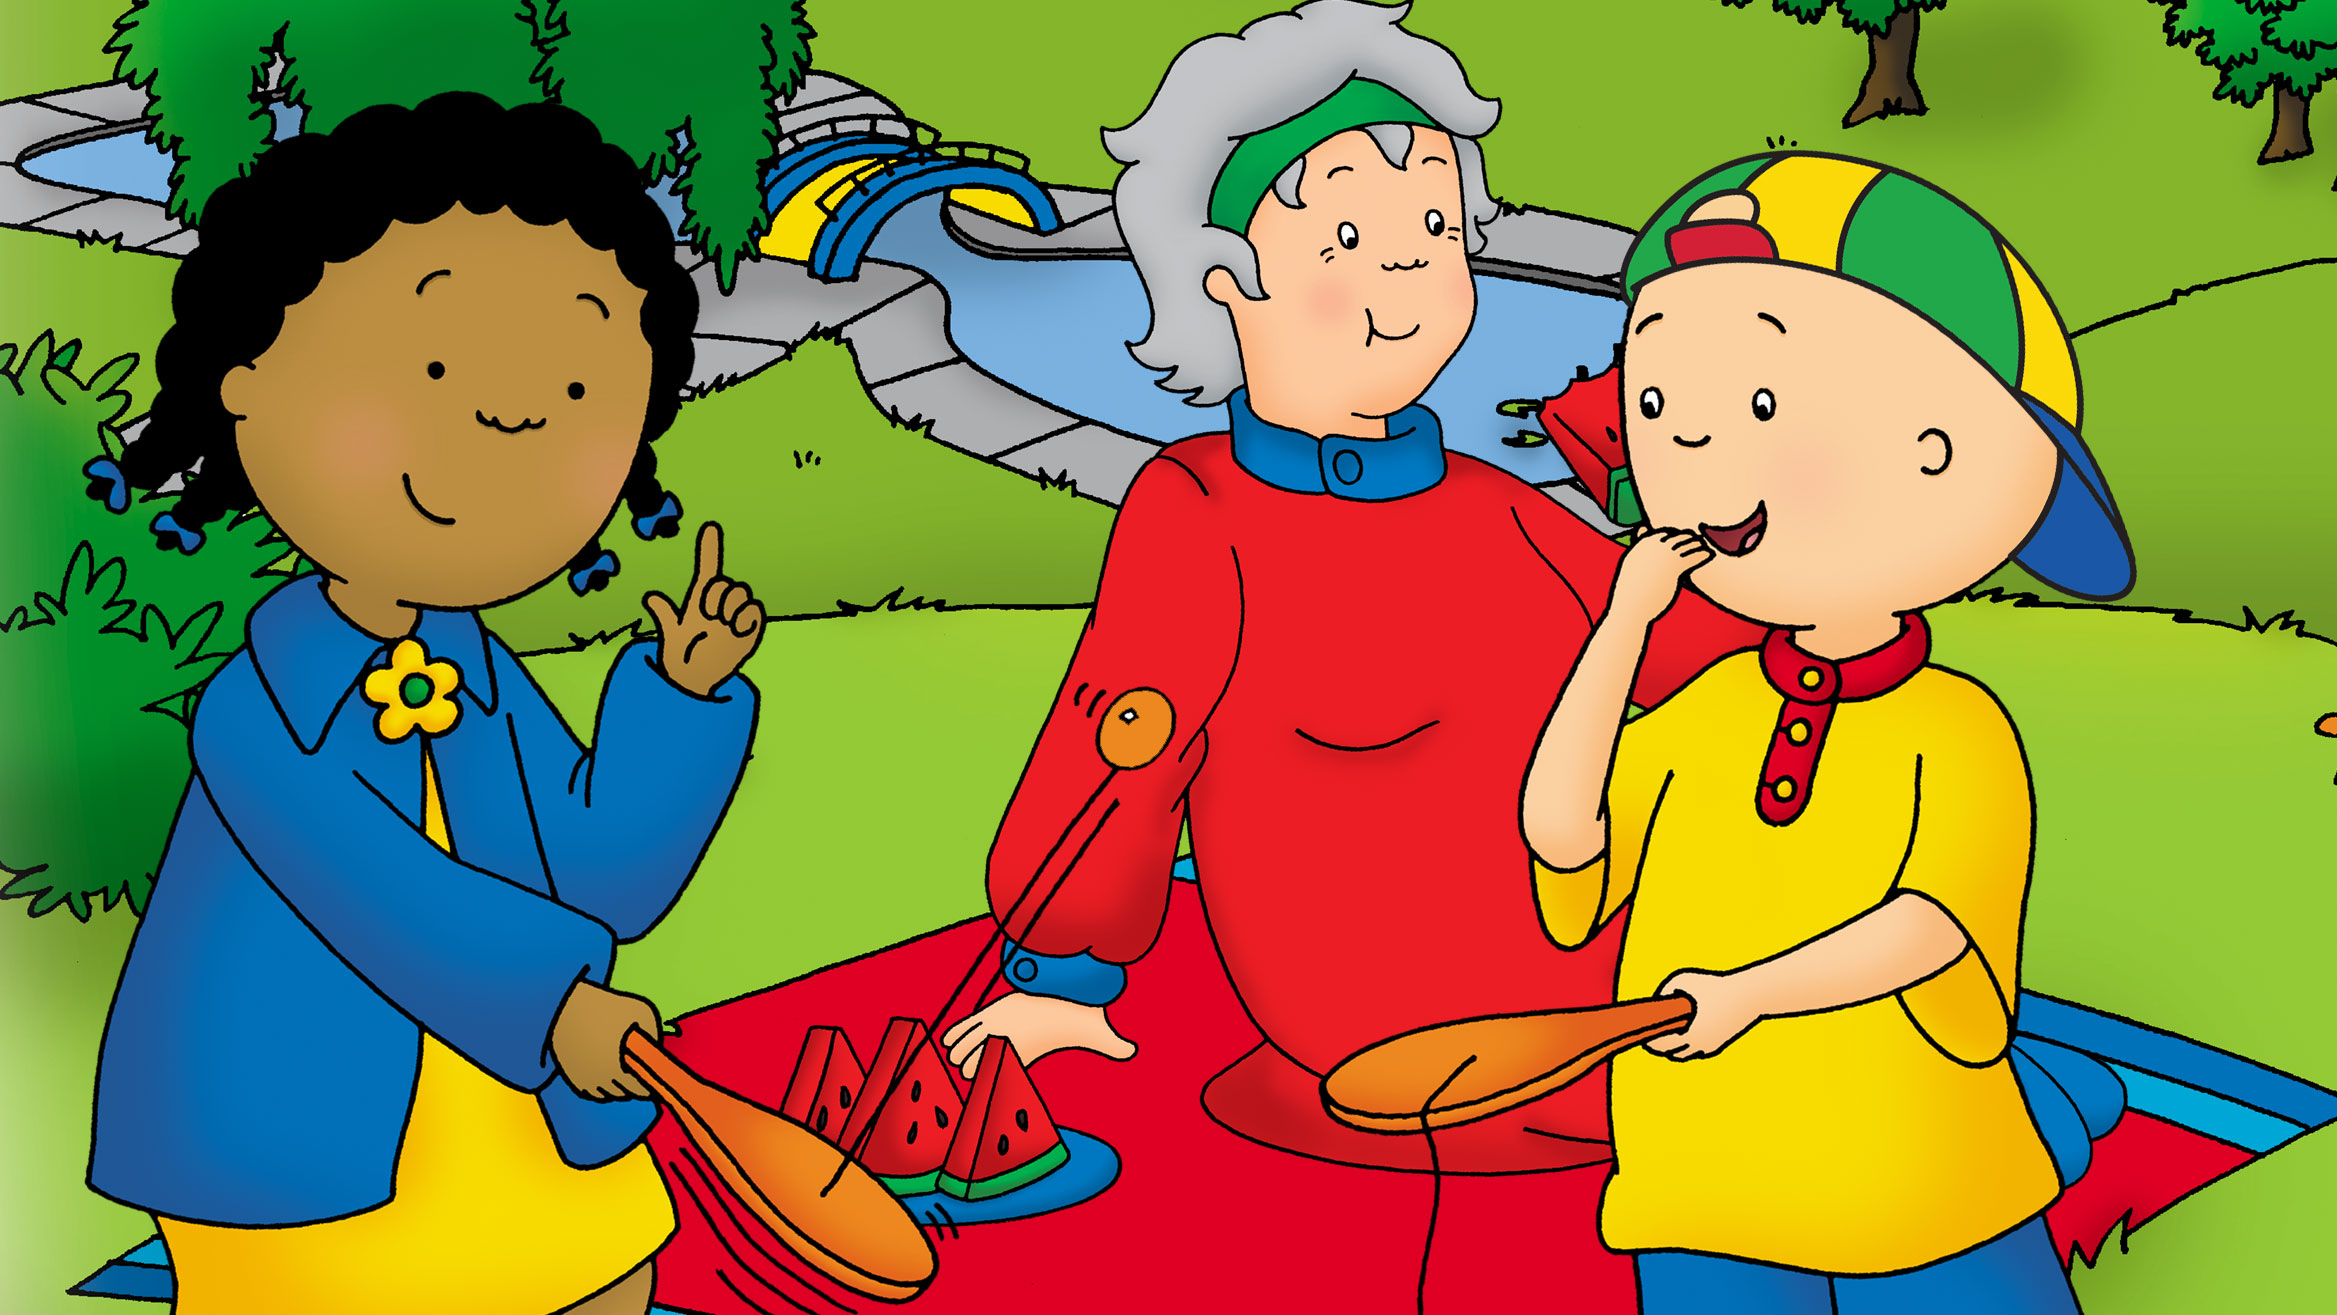 Caillou is partnering with PBS KIDS to promote Summer Learning! post image.